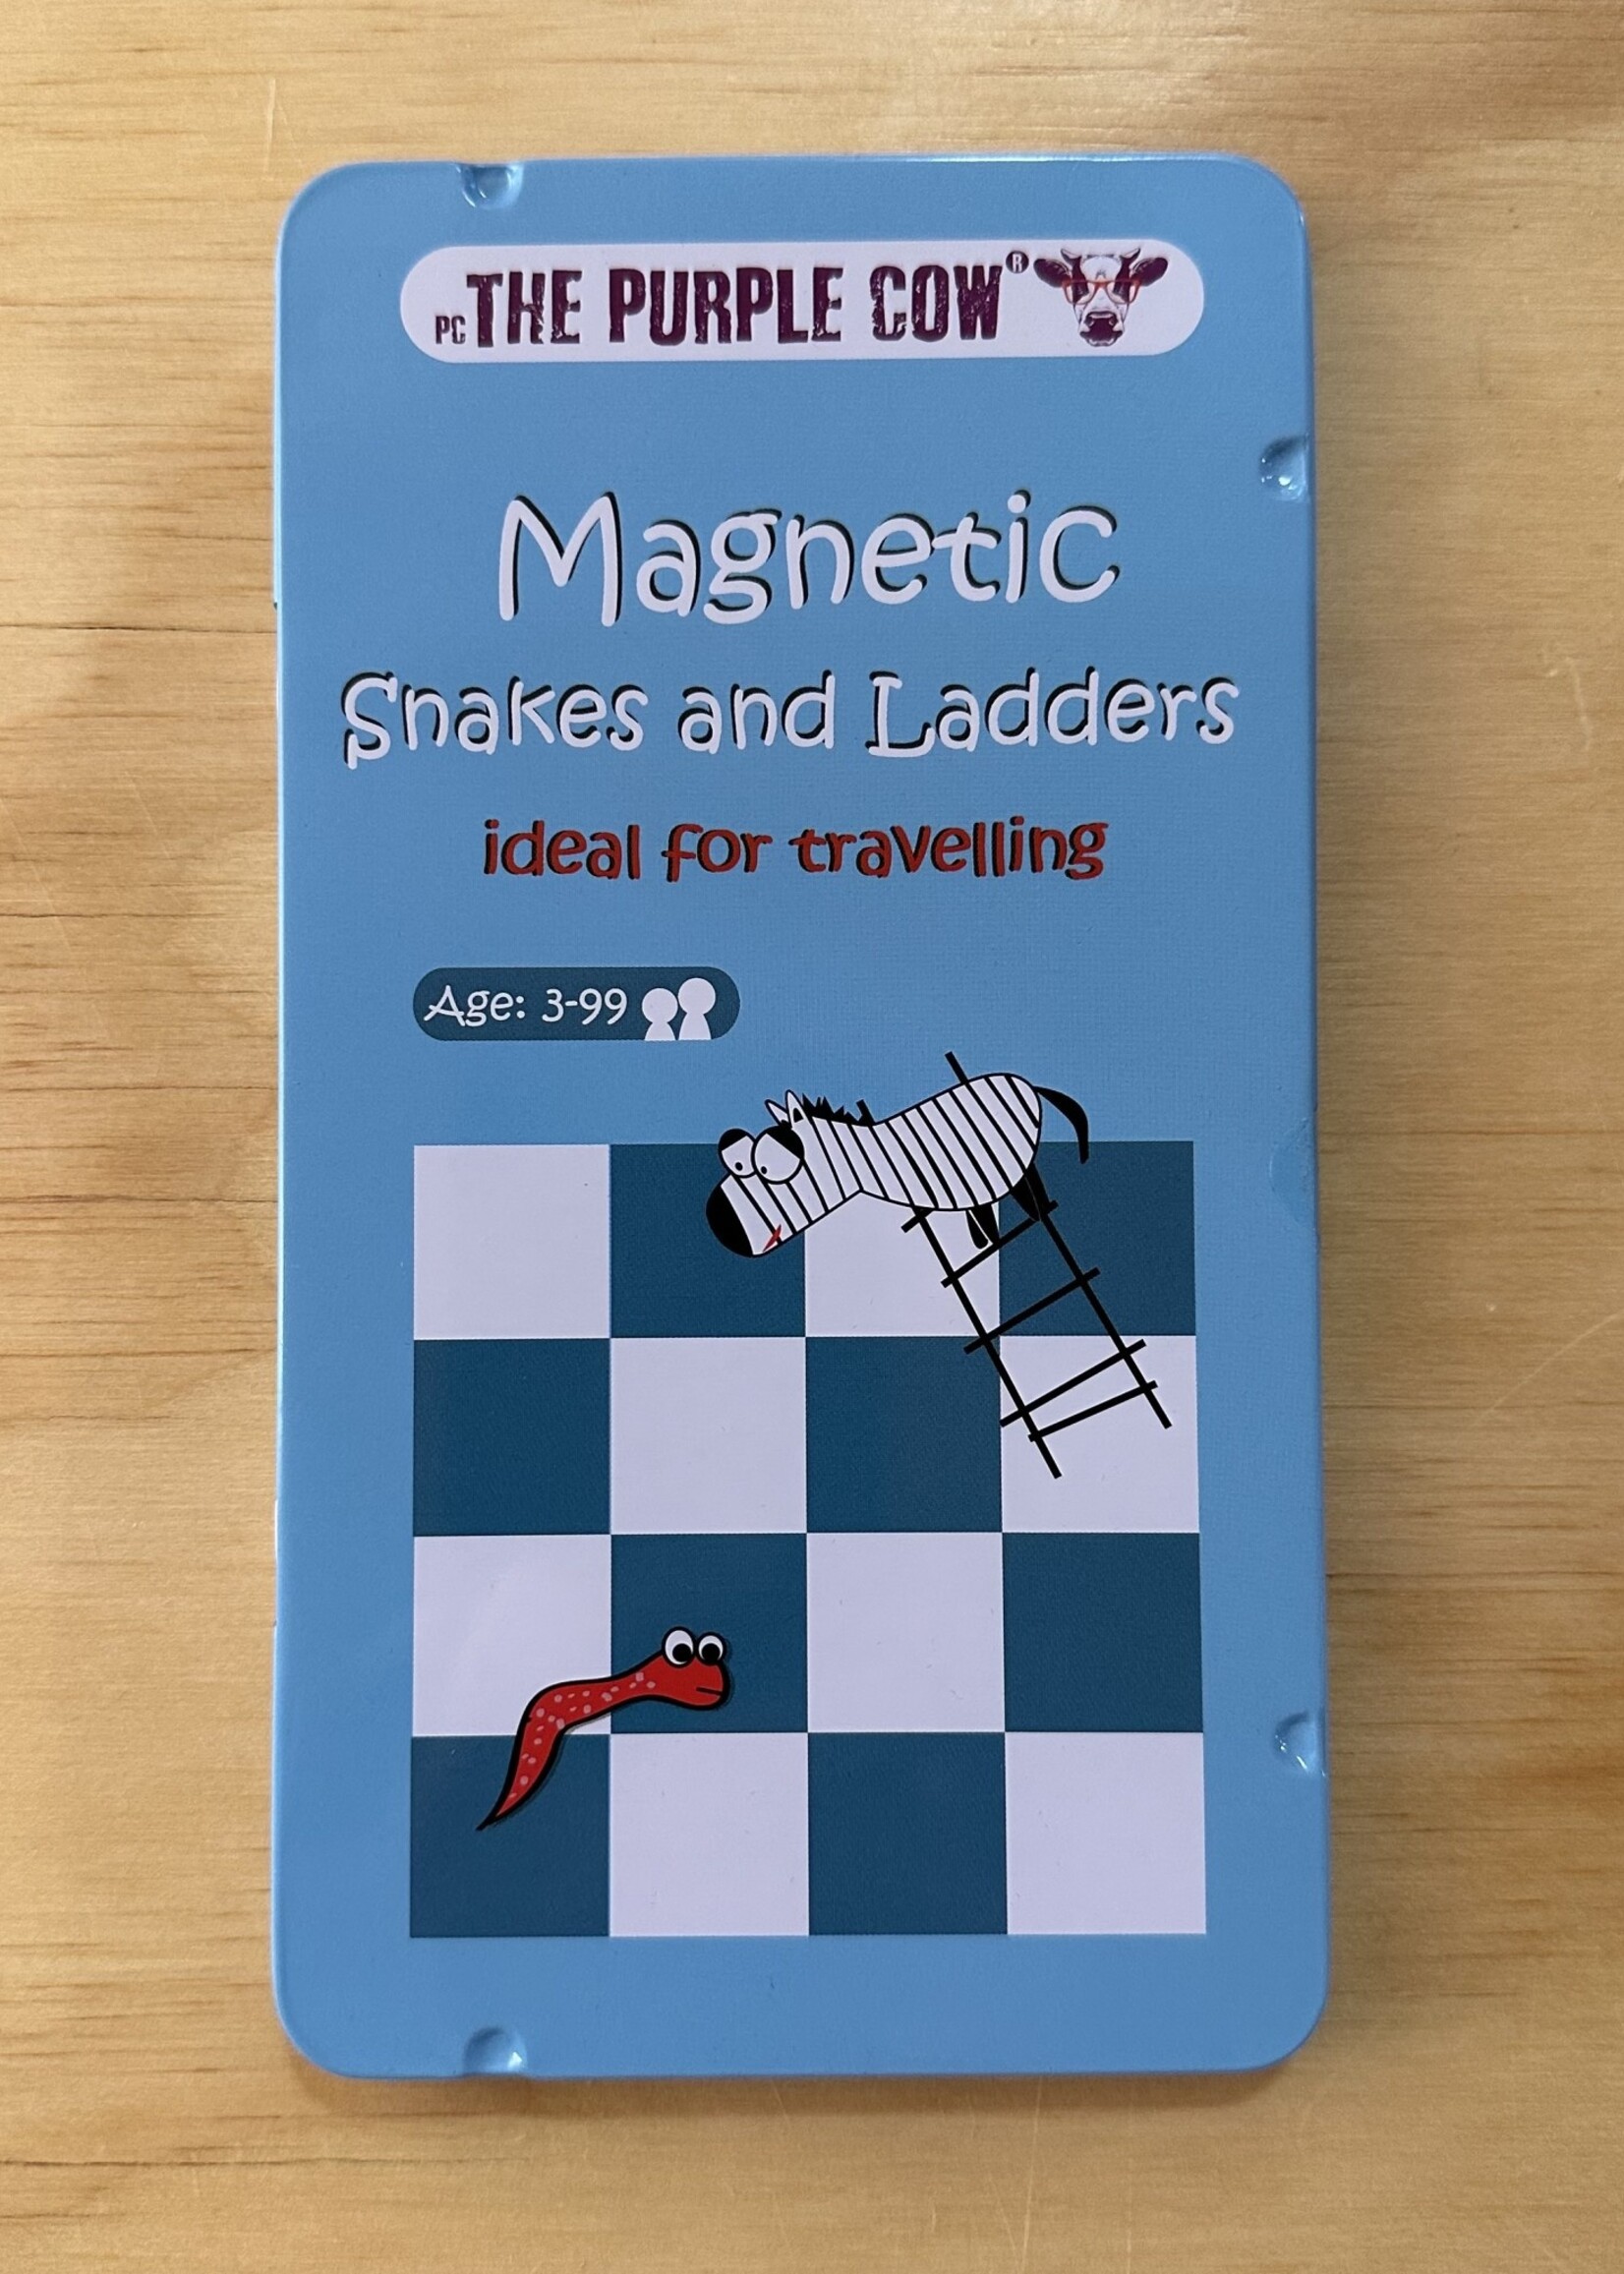 Travel Game - Magnetic Snakes and Ladders